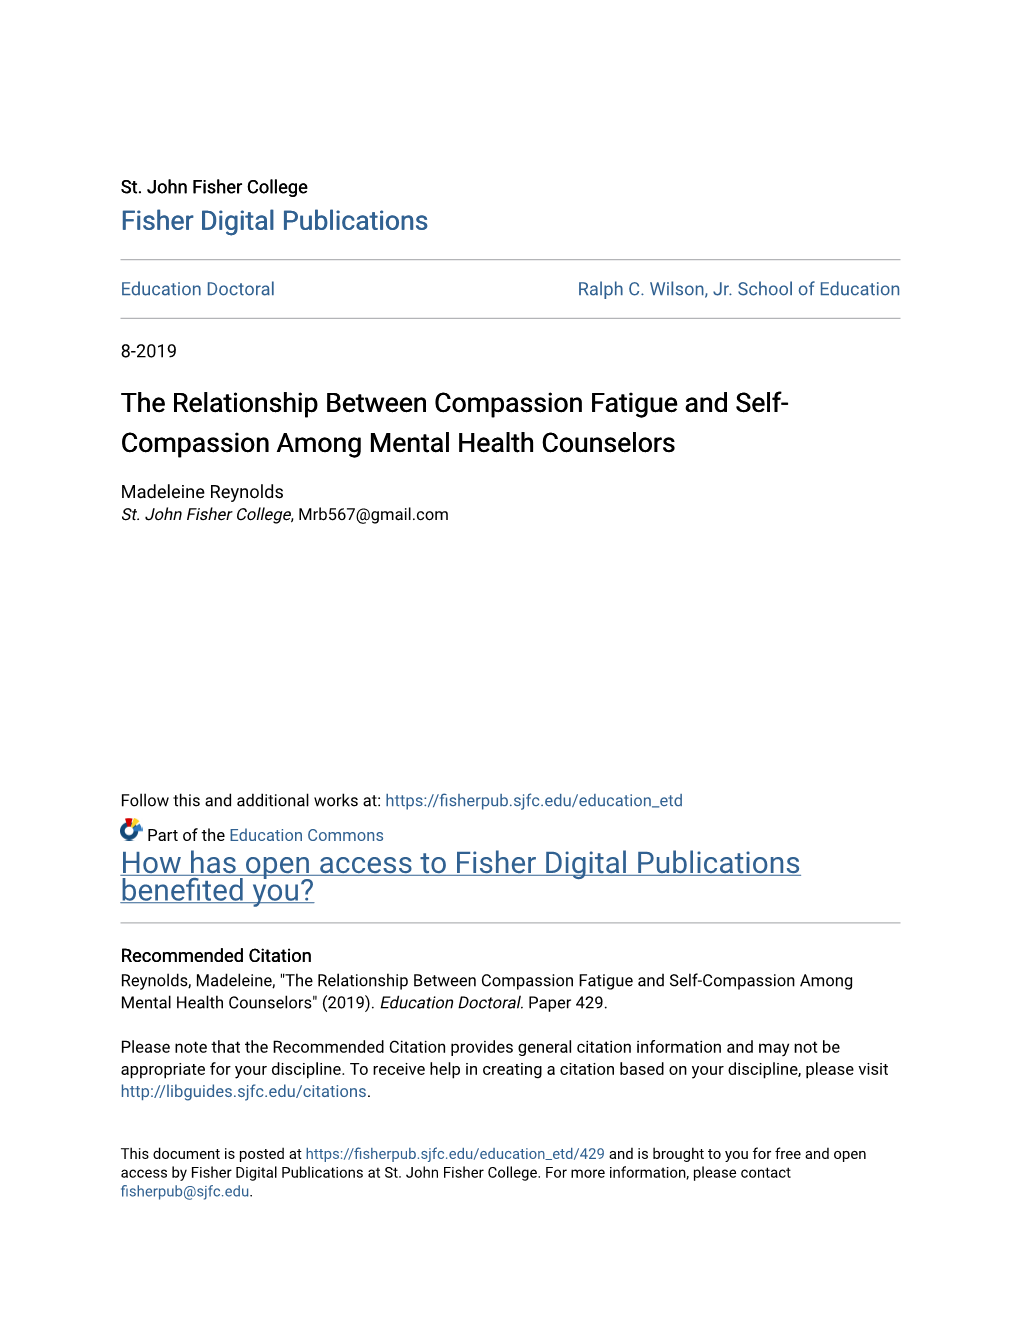 The Relationship Between Compassion Fatigue and Self- Compassion Among Mental Health Counselors